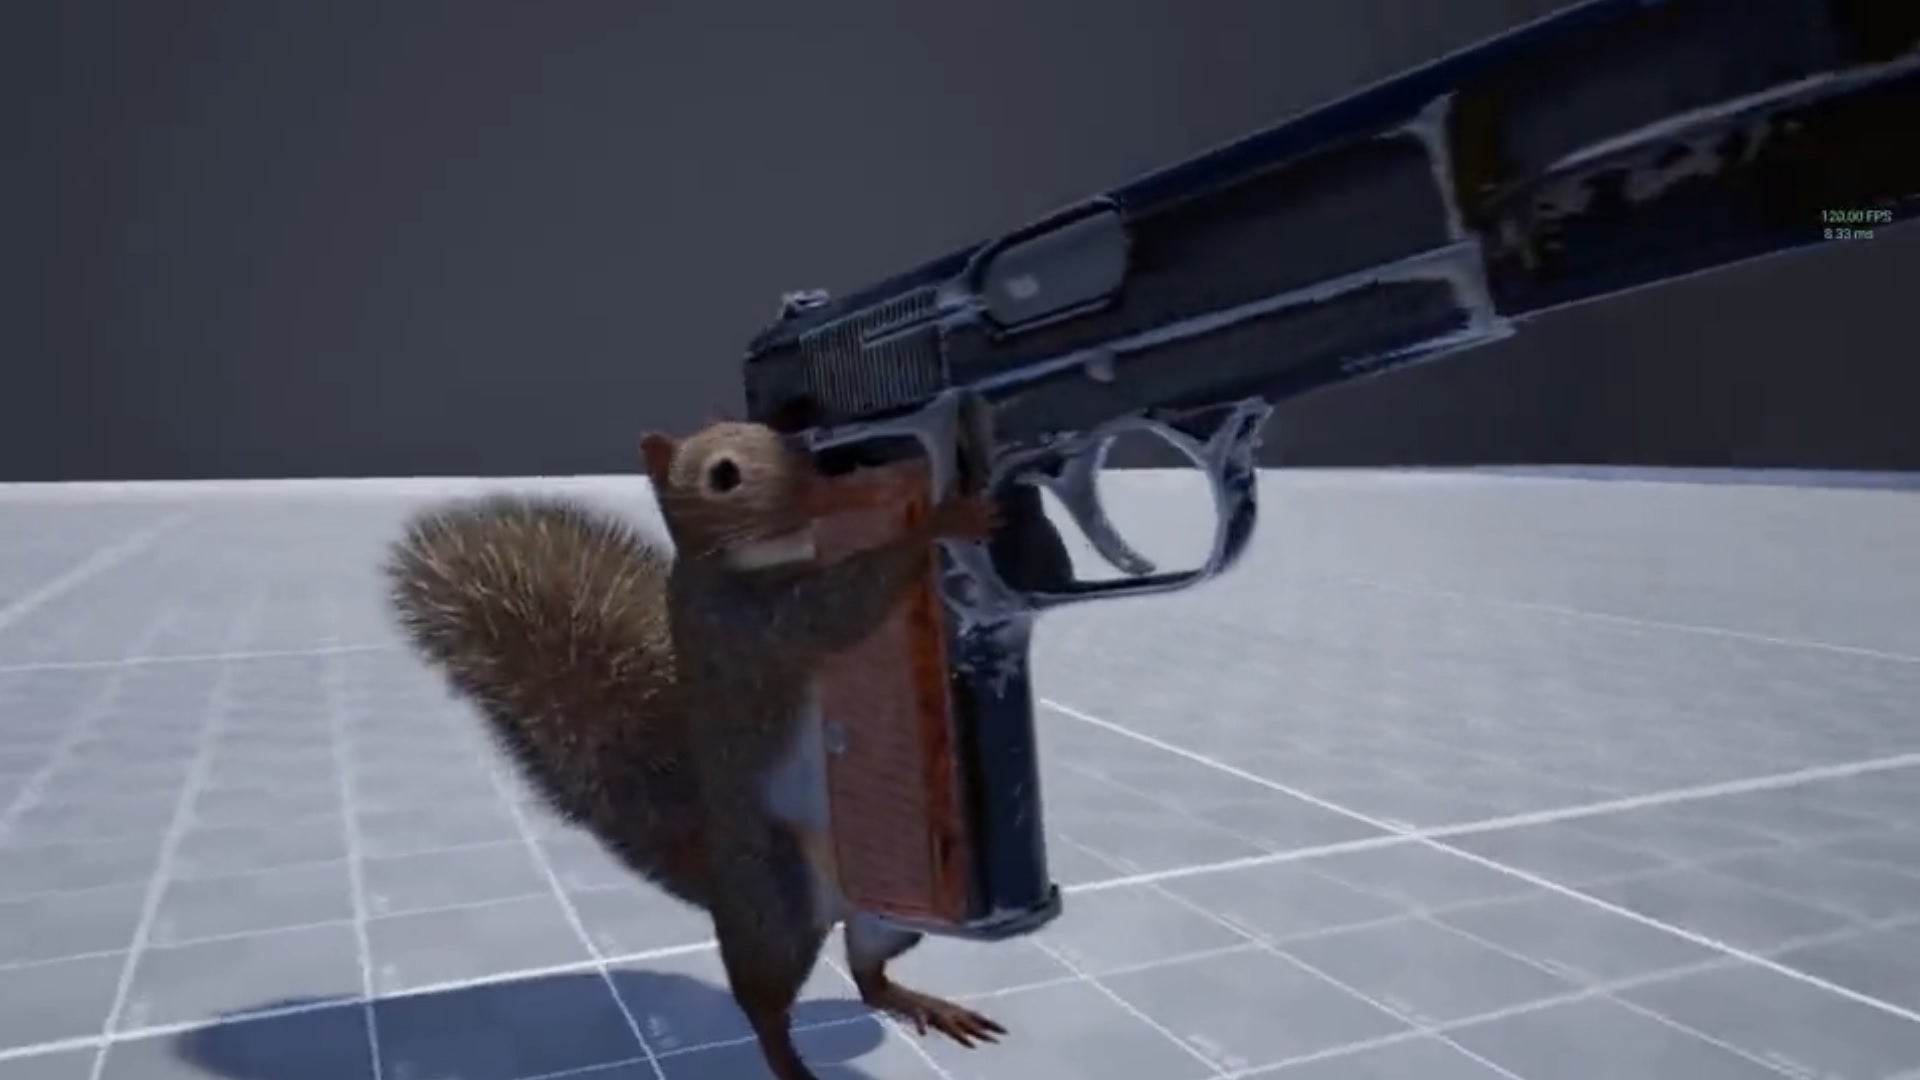 A squirrel holding a glock in UE5. His little hands can't reach the trigger so it's okay.